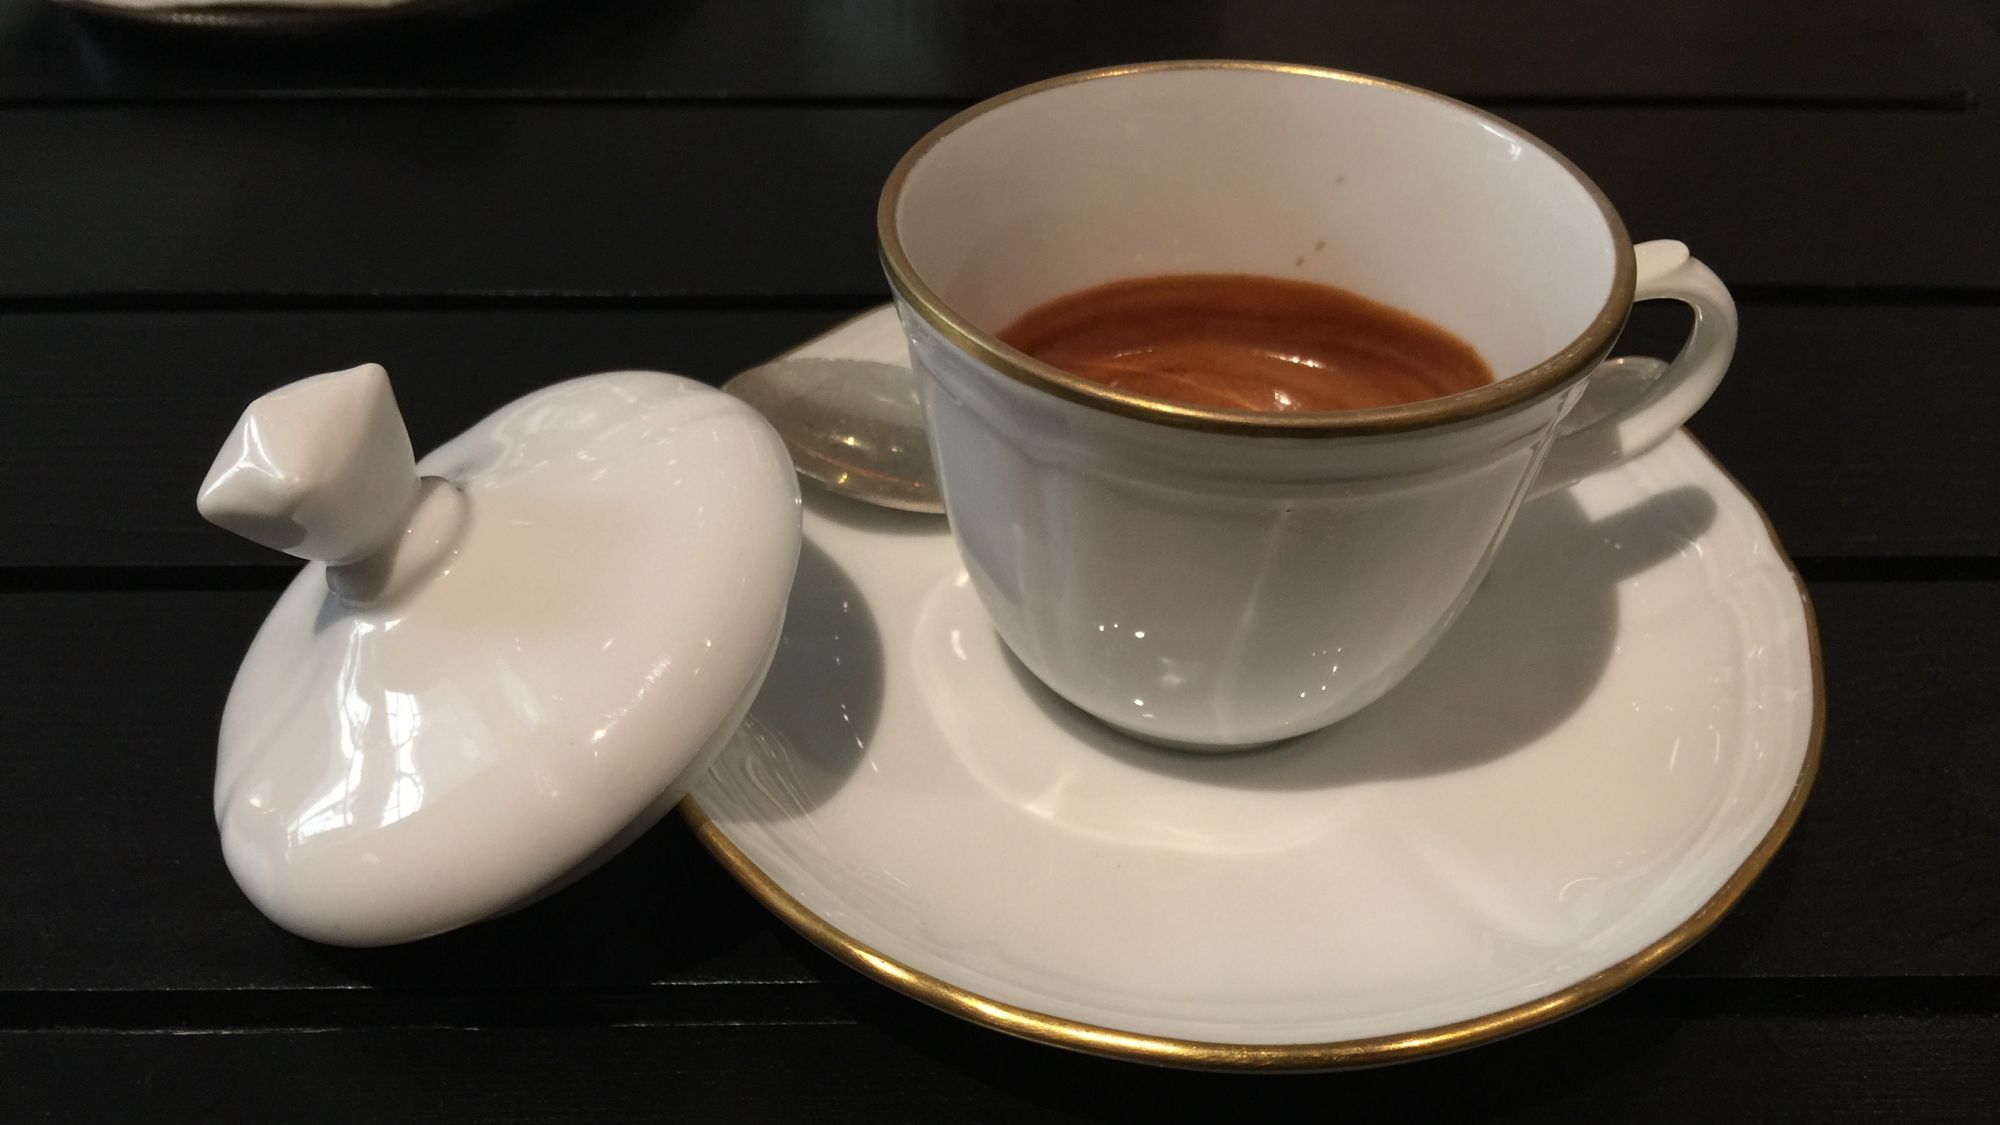 Coffee in Rome: the good, the bad, and the new - Trufflepig